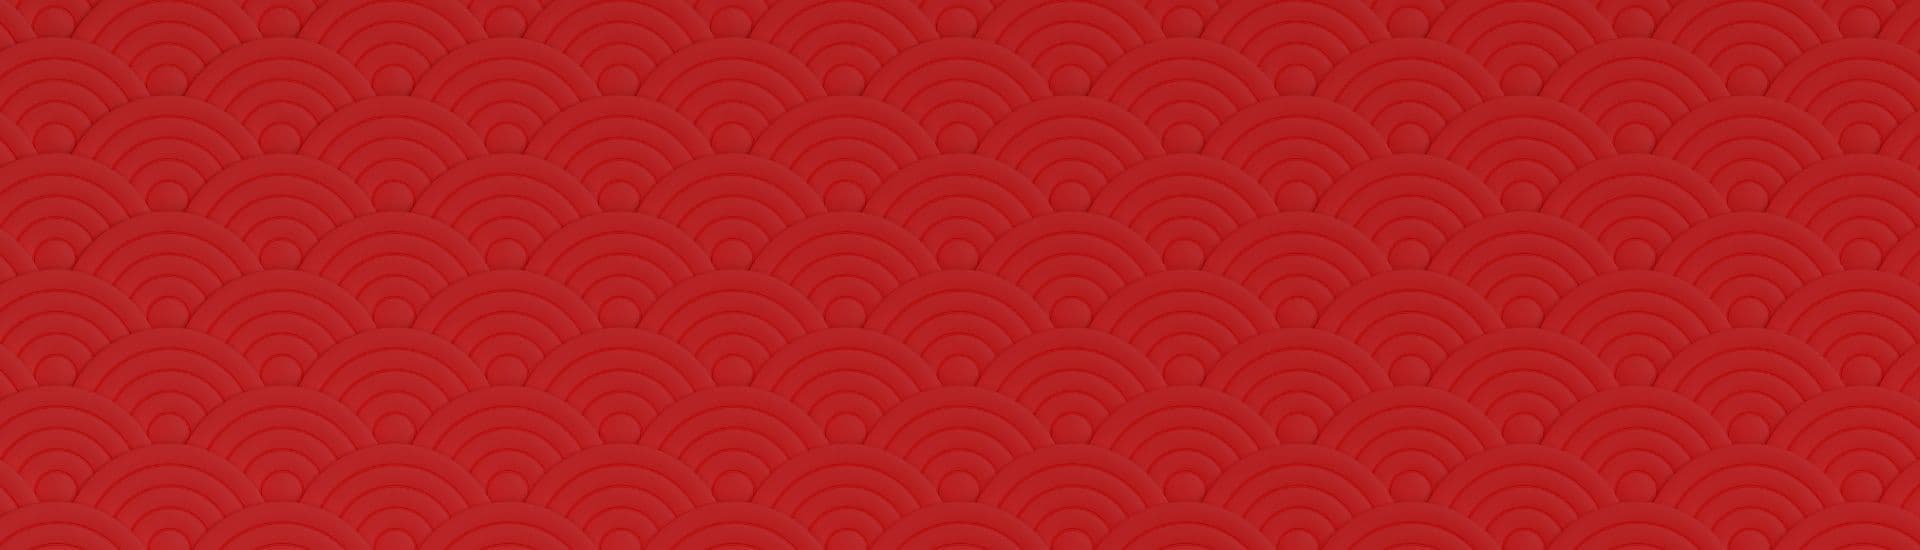 Red repeating half circle pattern banner